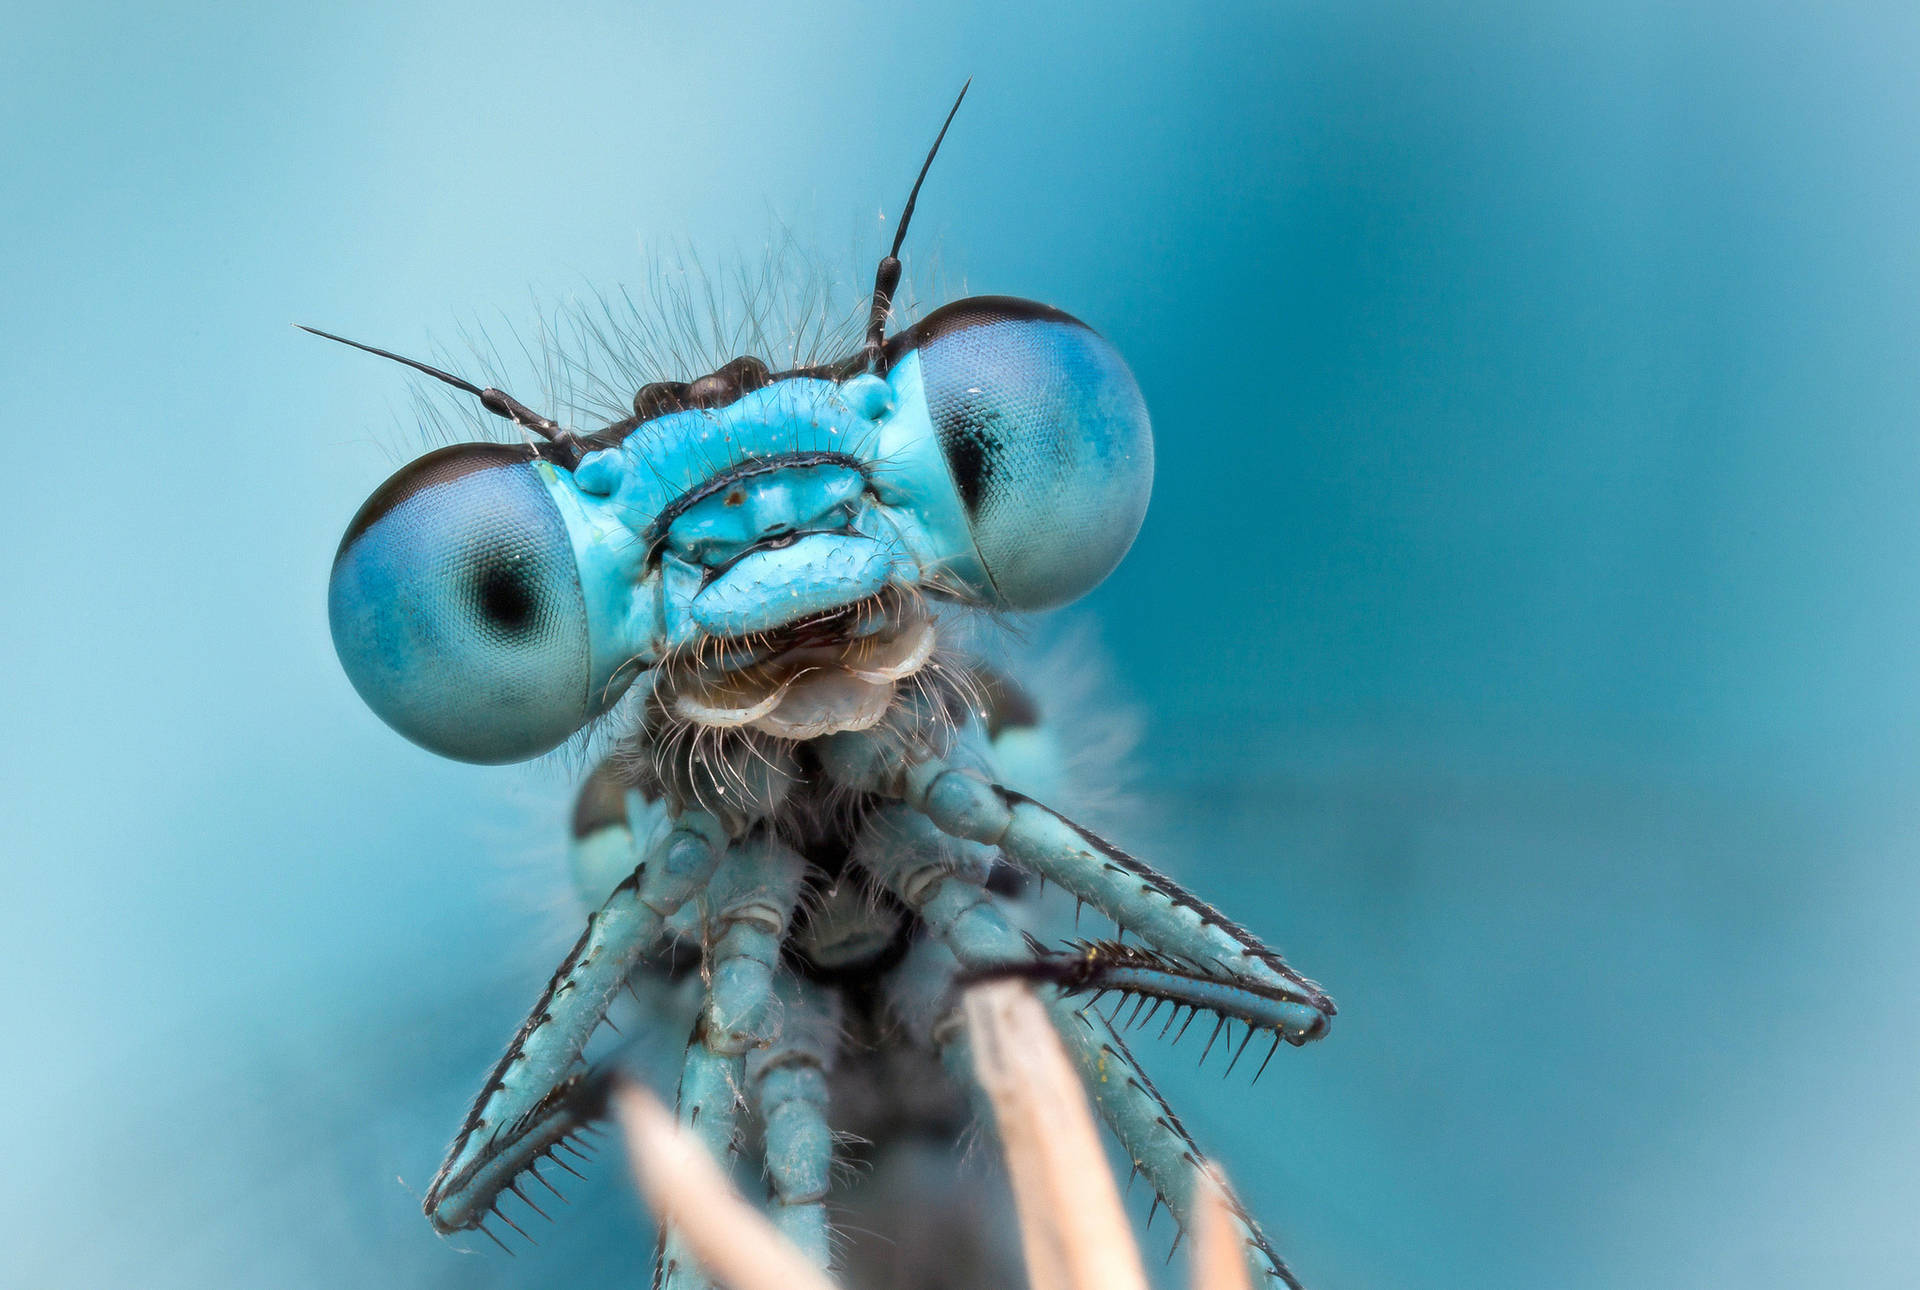 Free Dragonfly Wallpaper Downloads, [100+] Dragonfly Wallpapers for FREE |  